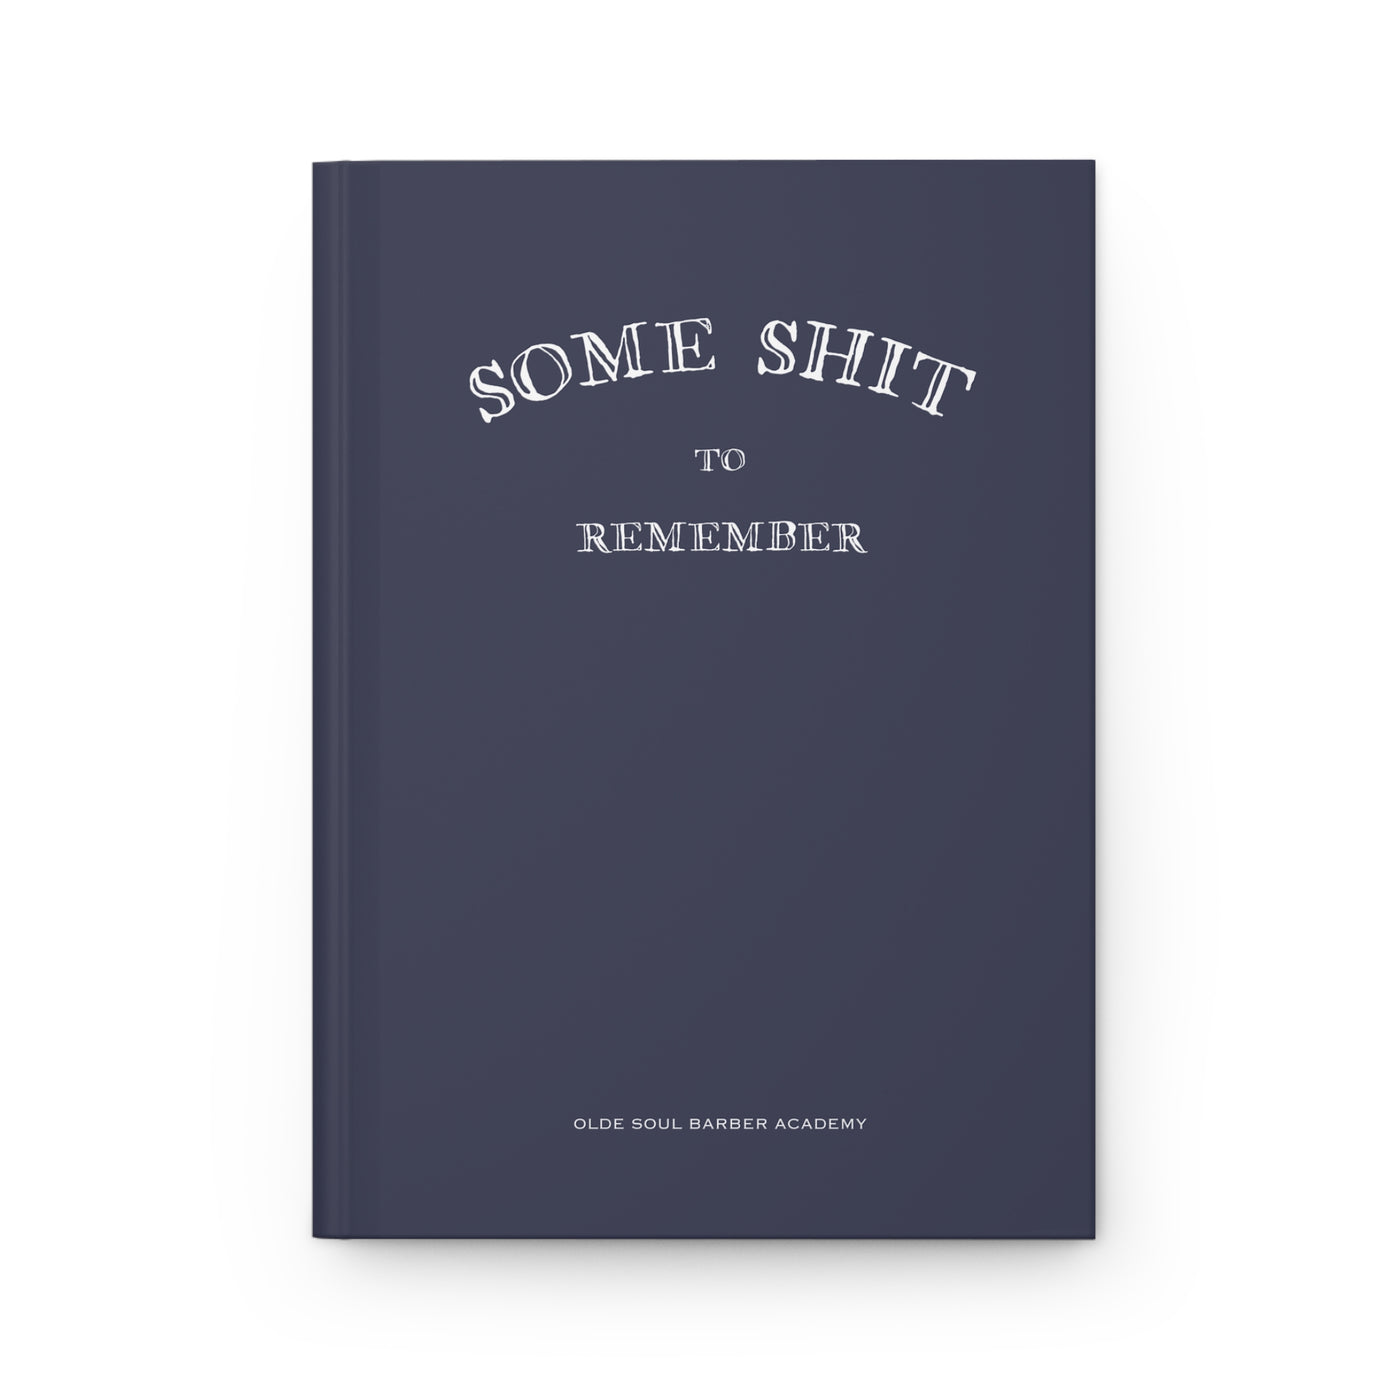 "SOME SHIT TO REMEMBER" HARDCOVER JOURNAL